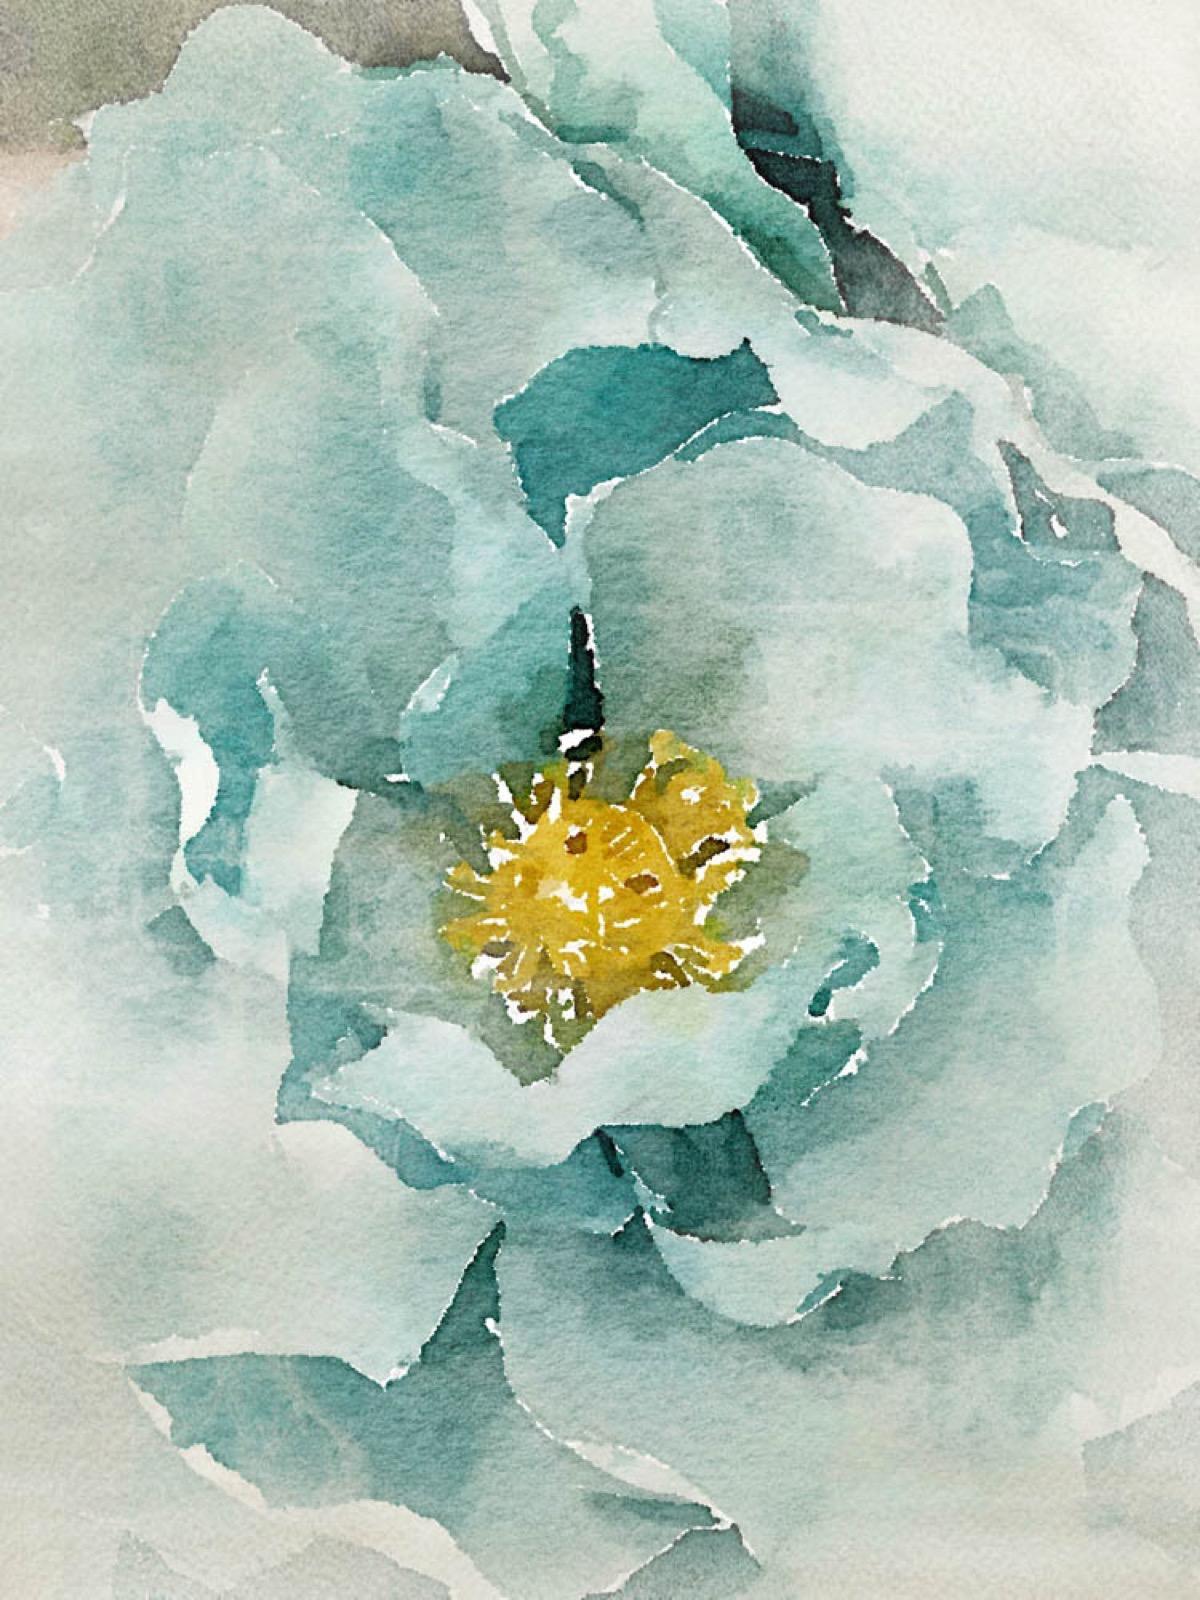 Aqua Dream Rustic Flowers Painting Embellished Giclee on Canvas 40w X 60h

State-of-the-art HAND EMBELLISHED ∽ MUSEUM QUALITY ∽ DISPLAY READY Giclee Reproduction
Each limited edition Giclee is hand embellished by the artist, making it one of a kind